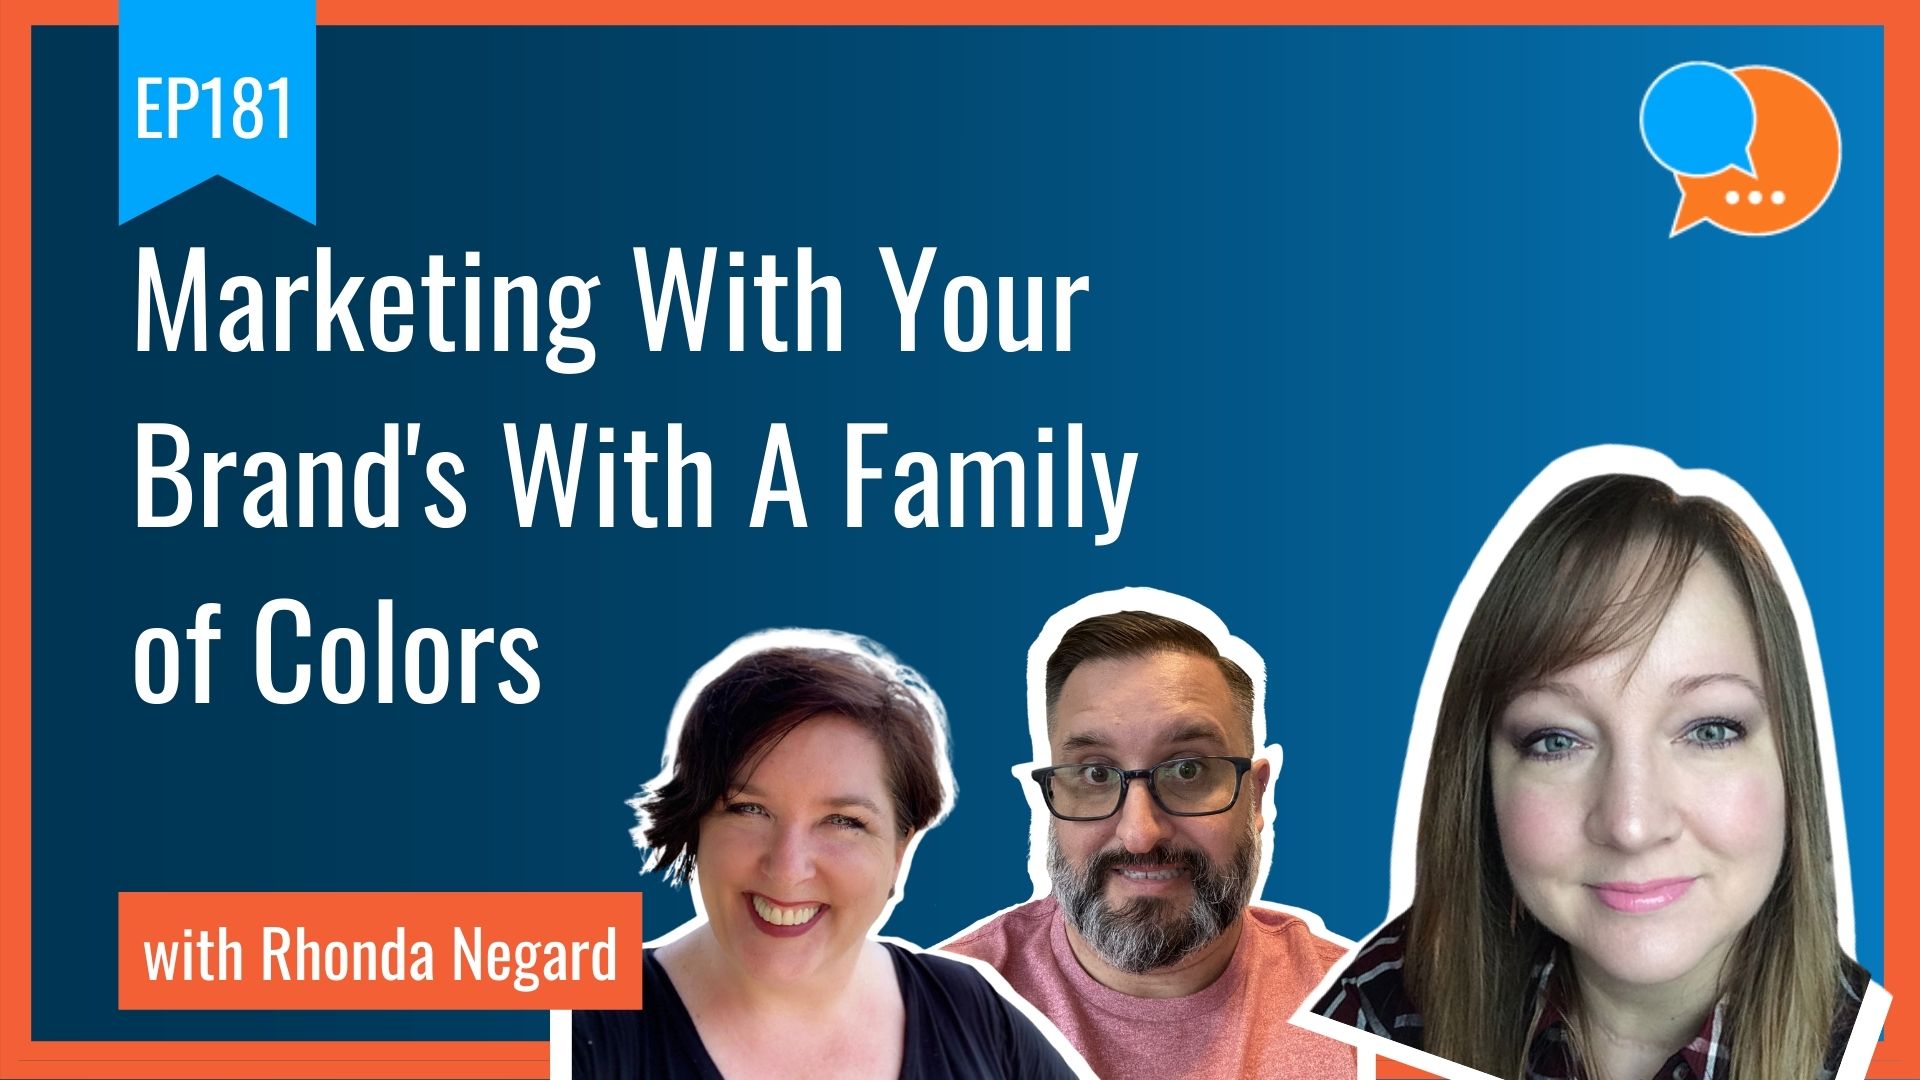 EP181 – Marketing Your Brand With A Family of Colors